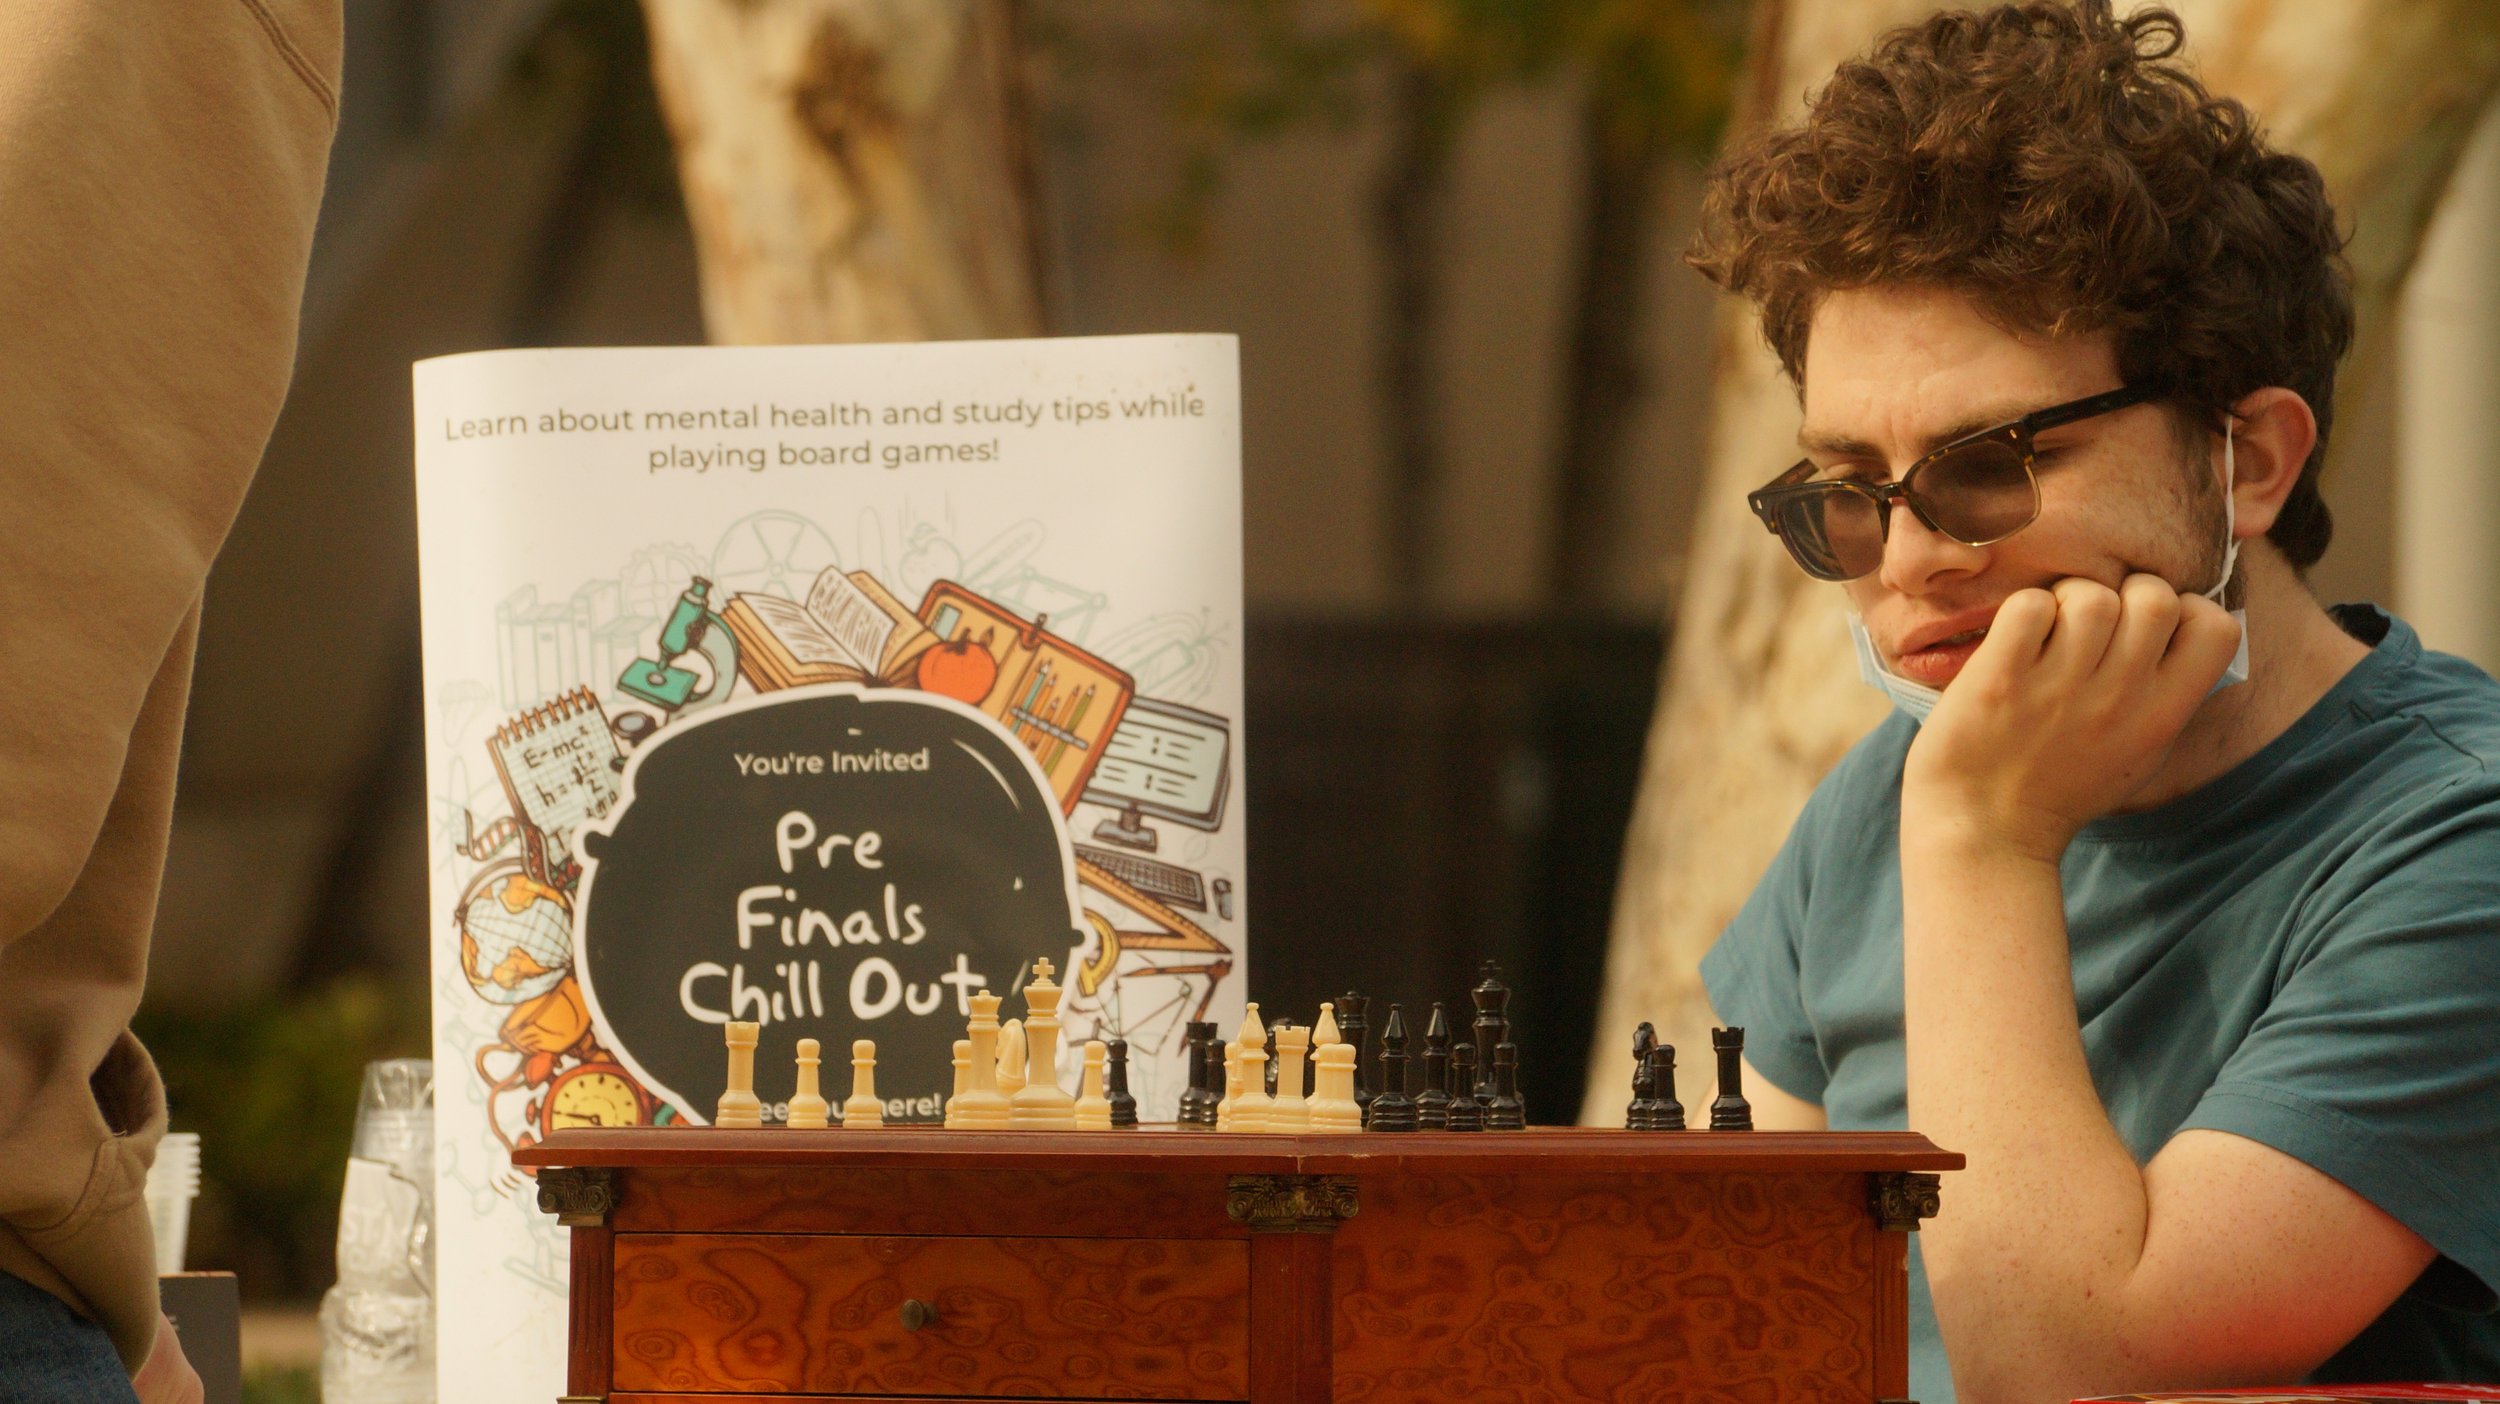  Sebastiam Rudomin, 28, conteplating his next move in his chess game at the Pre Finals Chill Out event. (Spencer Chen) 